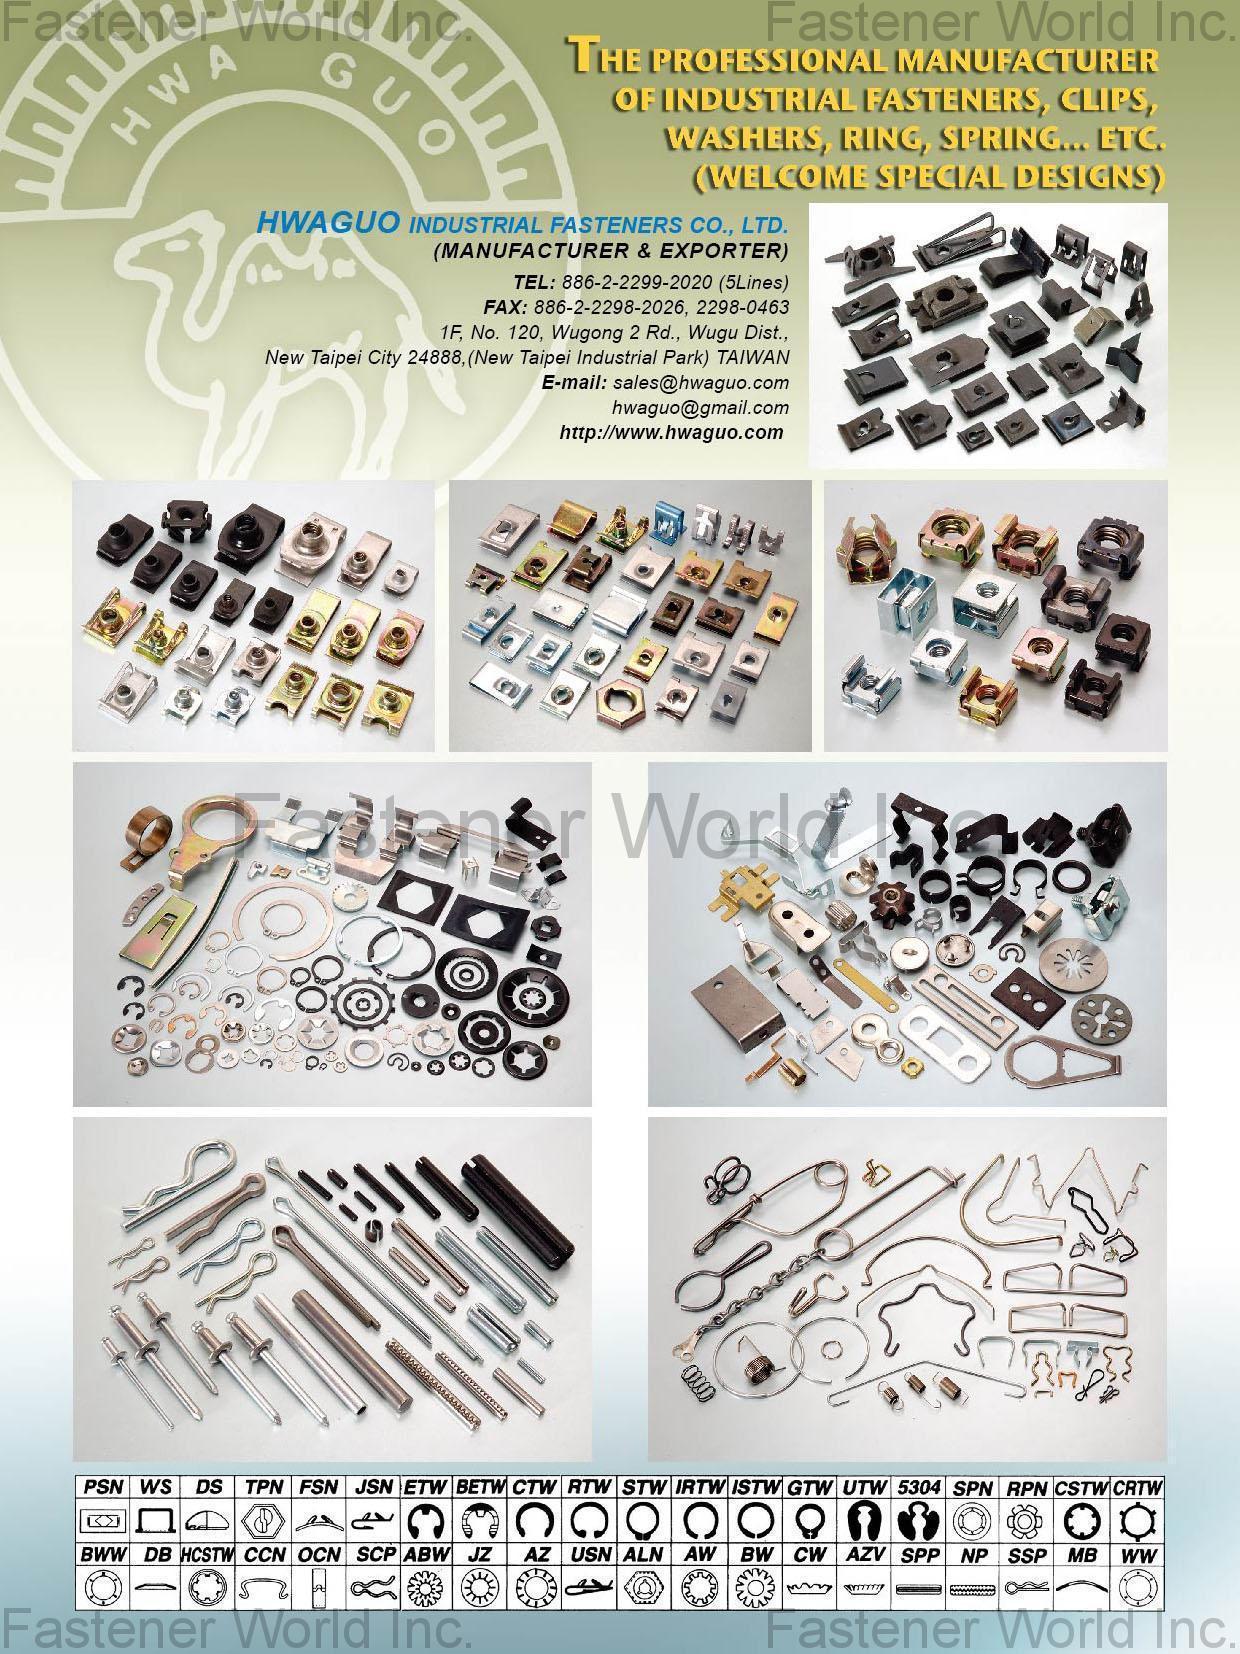 HWAGUO INDUSTRIAL FASTENERS CO., LTD. , U-Nuts,Speed Nuts,U-Clips / V-Clips,Cap Nuts / Hutclips / Push on Caps,Turned Parts,Tee Nuts / T-Nuts,Cage Nuts,Retaining Rings / E-Rings / C-Rings,Washers,Customized Shapes,Rivets / Eyelets,Screws / Bolts,Plastic / Nylon /Rubber / Screw Assembly,Nuts,Springs , Clip Nuts